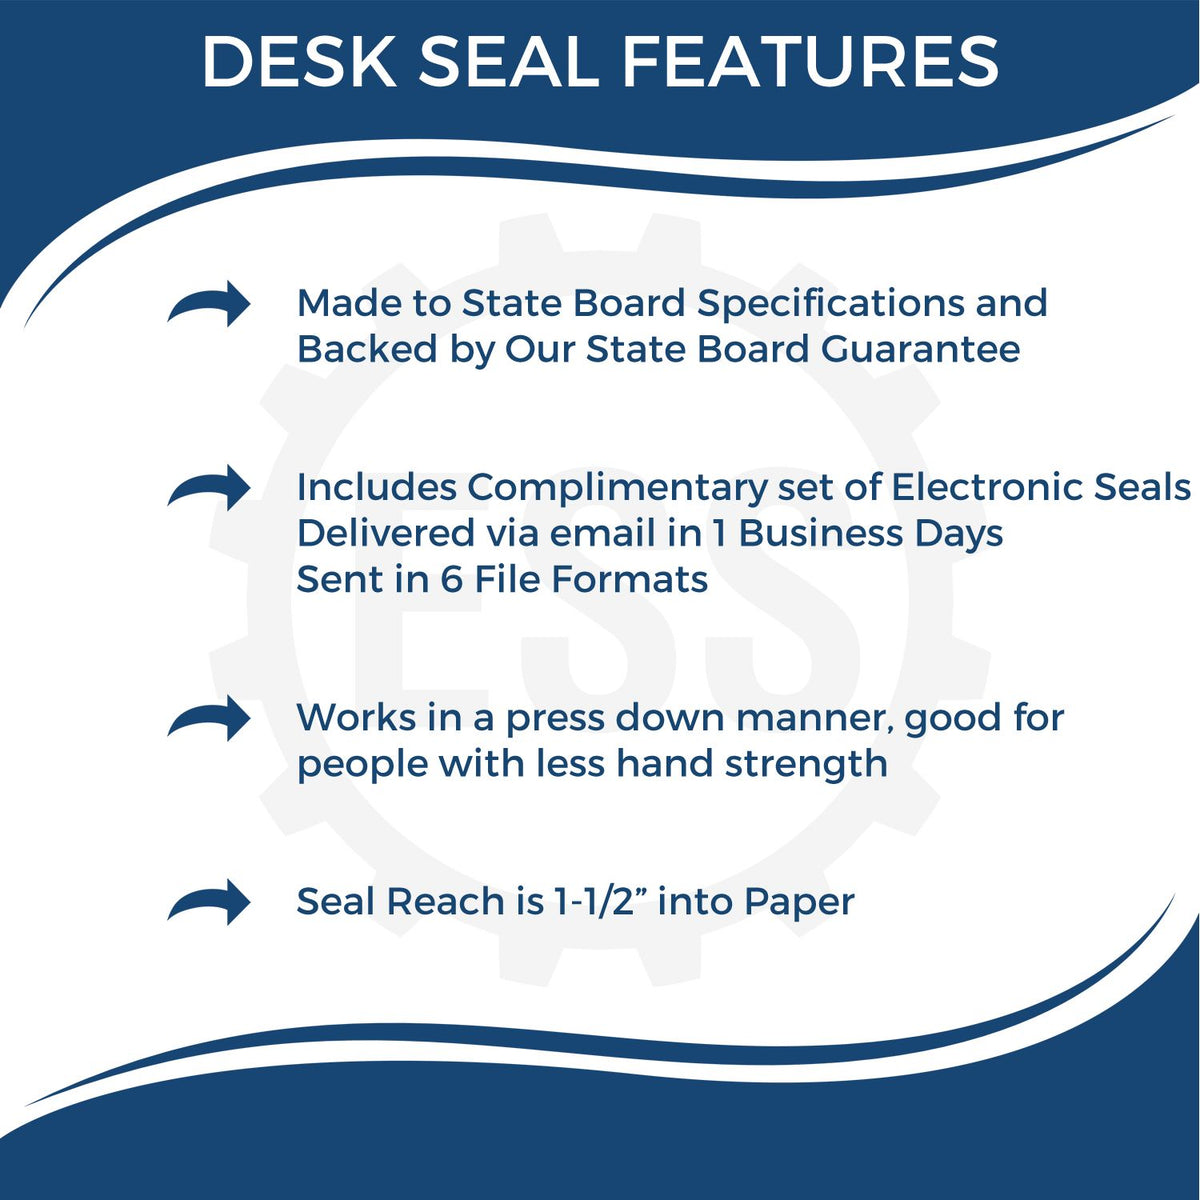 A picture of an infographic highlighting the selling points for the Colorado Desk Surveyor Seal Embosser